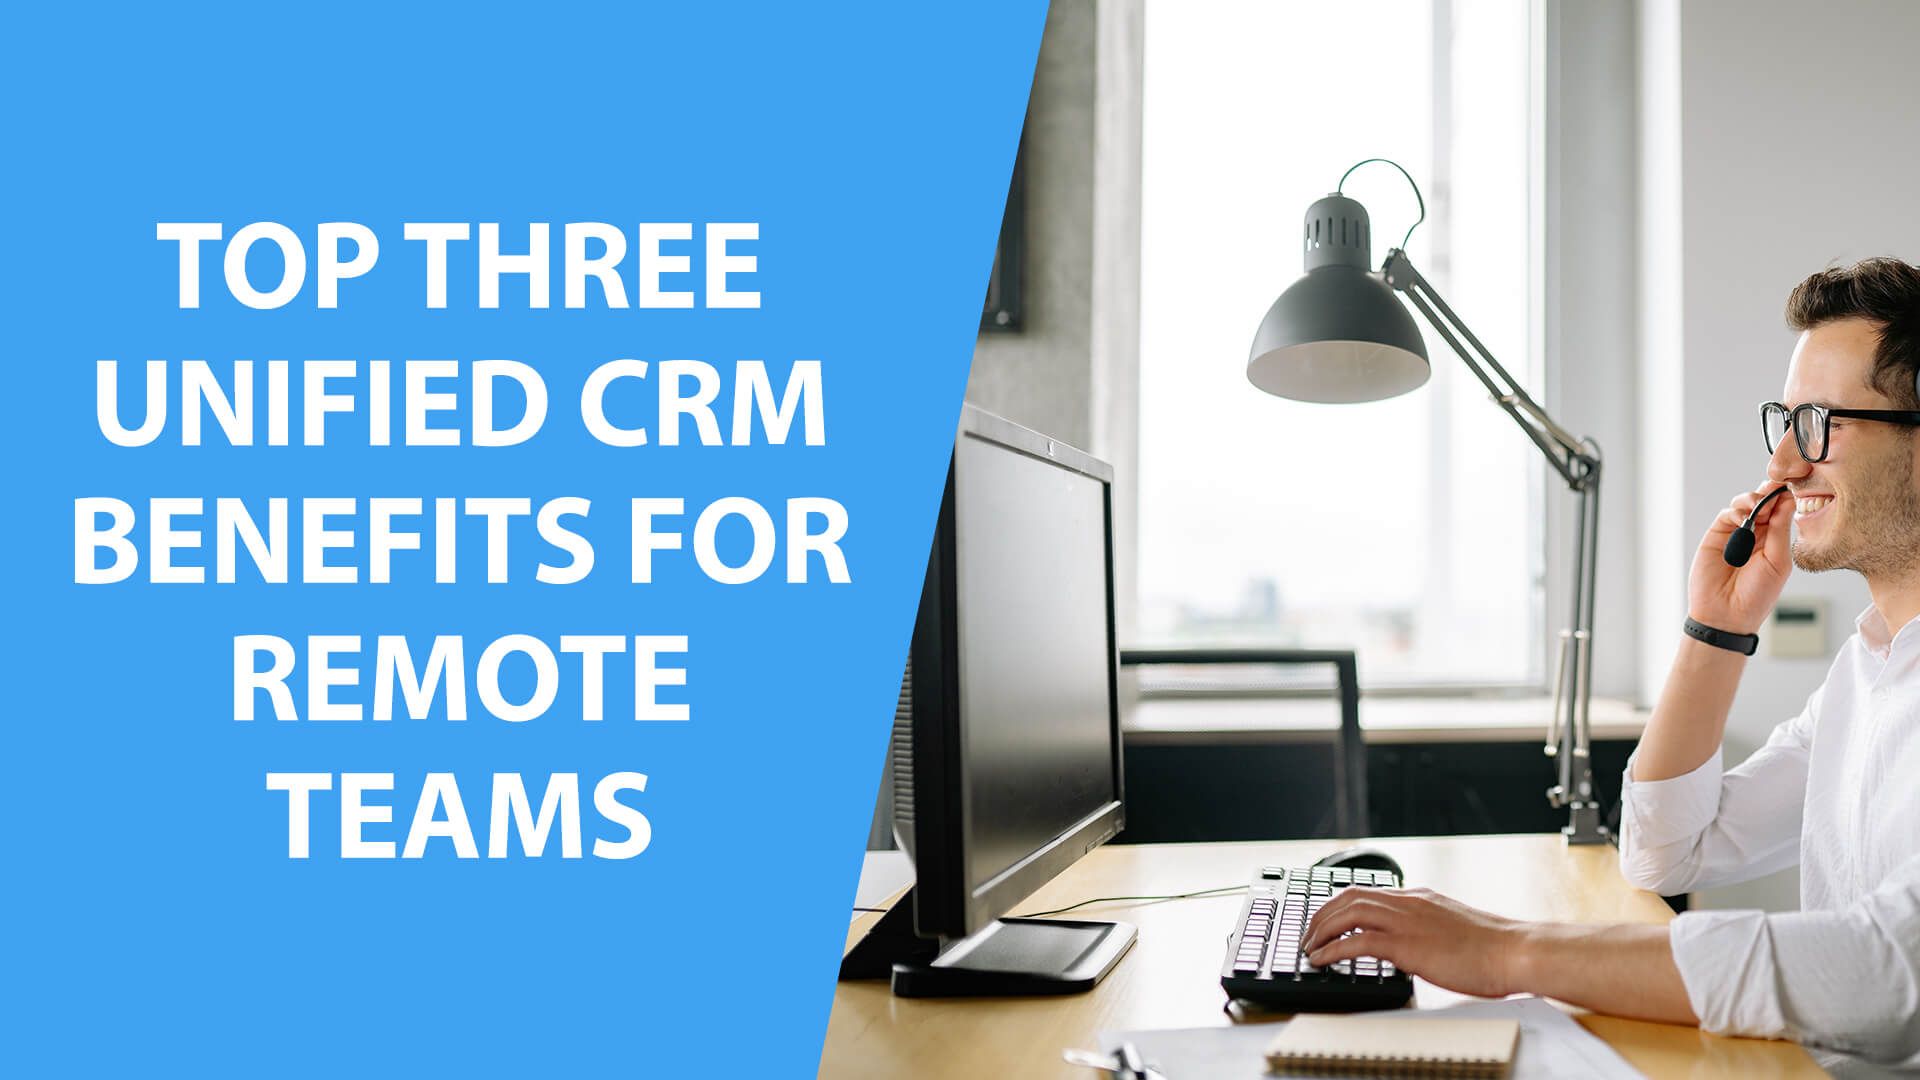 Top Three Unified CRM Benefits For Remote Teams